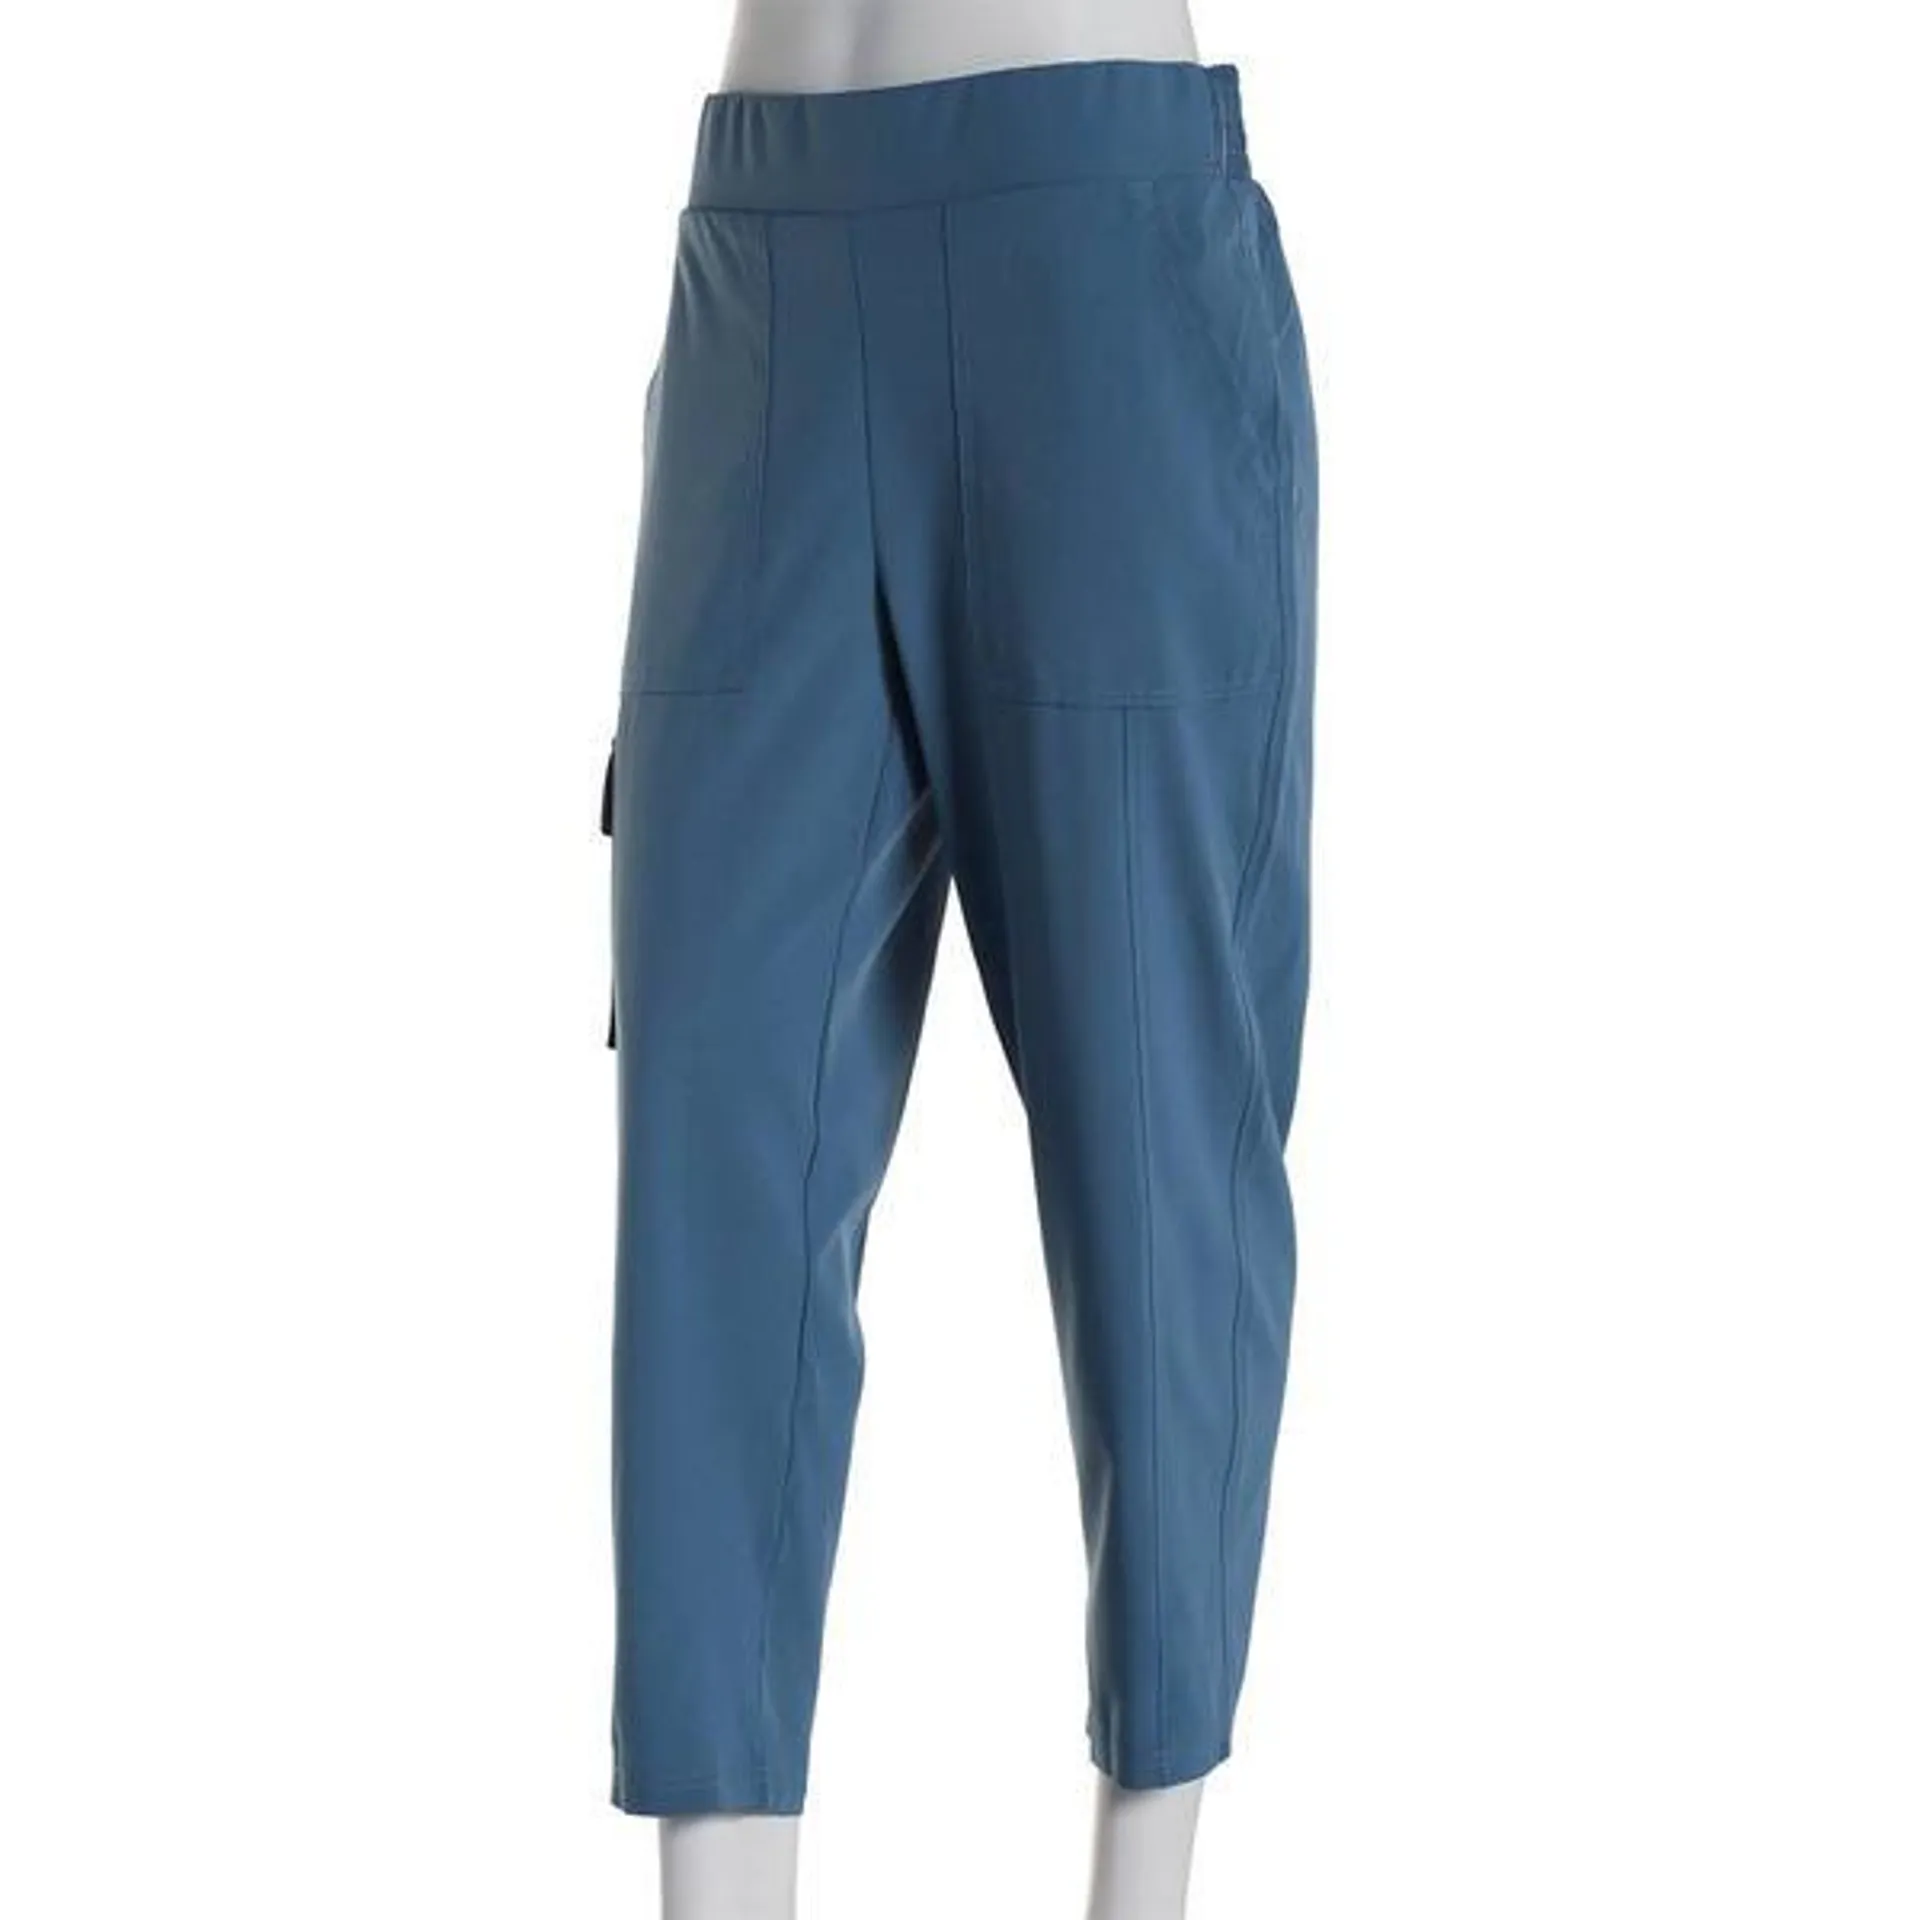 Womens Starting Point Cargo Stretch Woven Pants